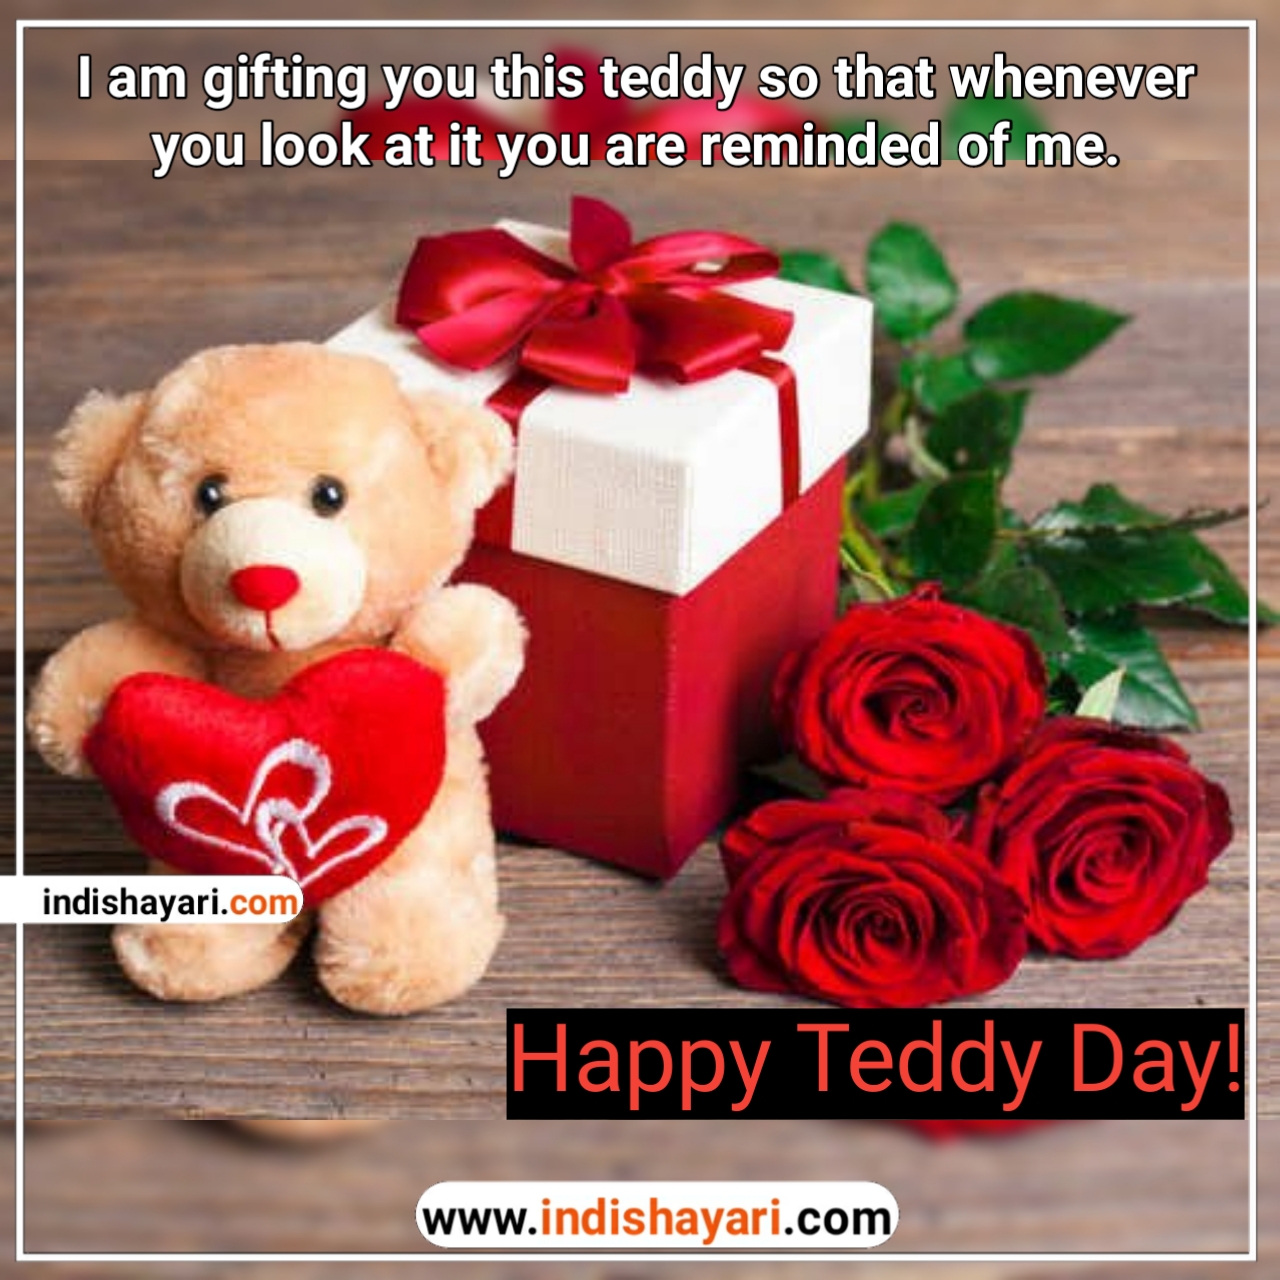 Happy Teddy Day whishes greetings sms quotes images for whatsapp Facebook Instagram status